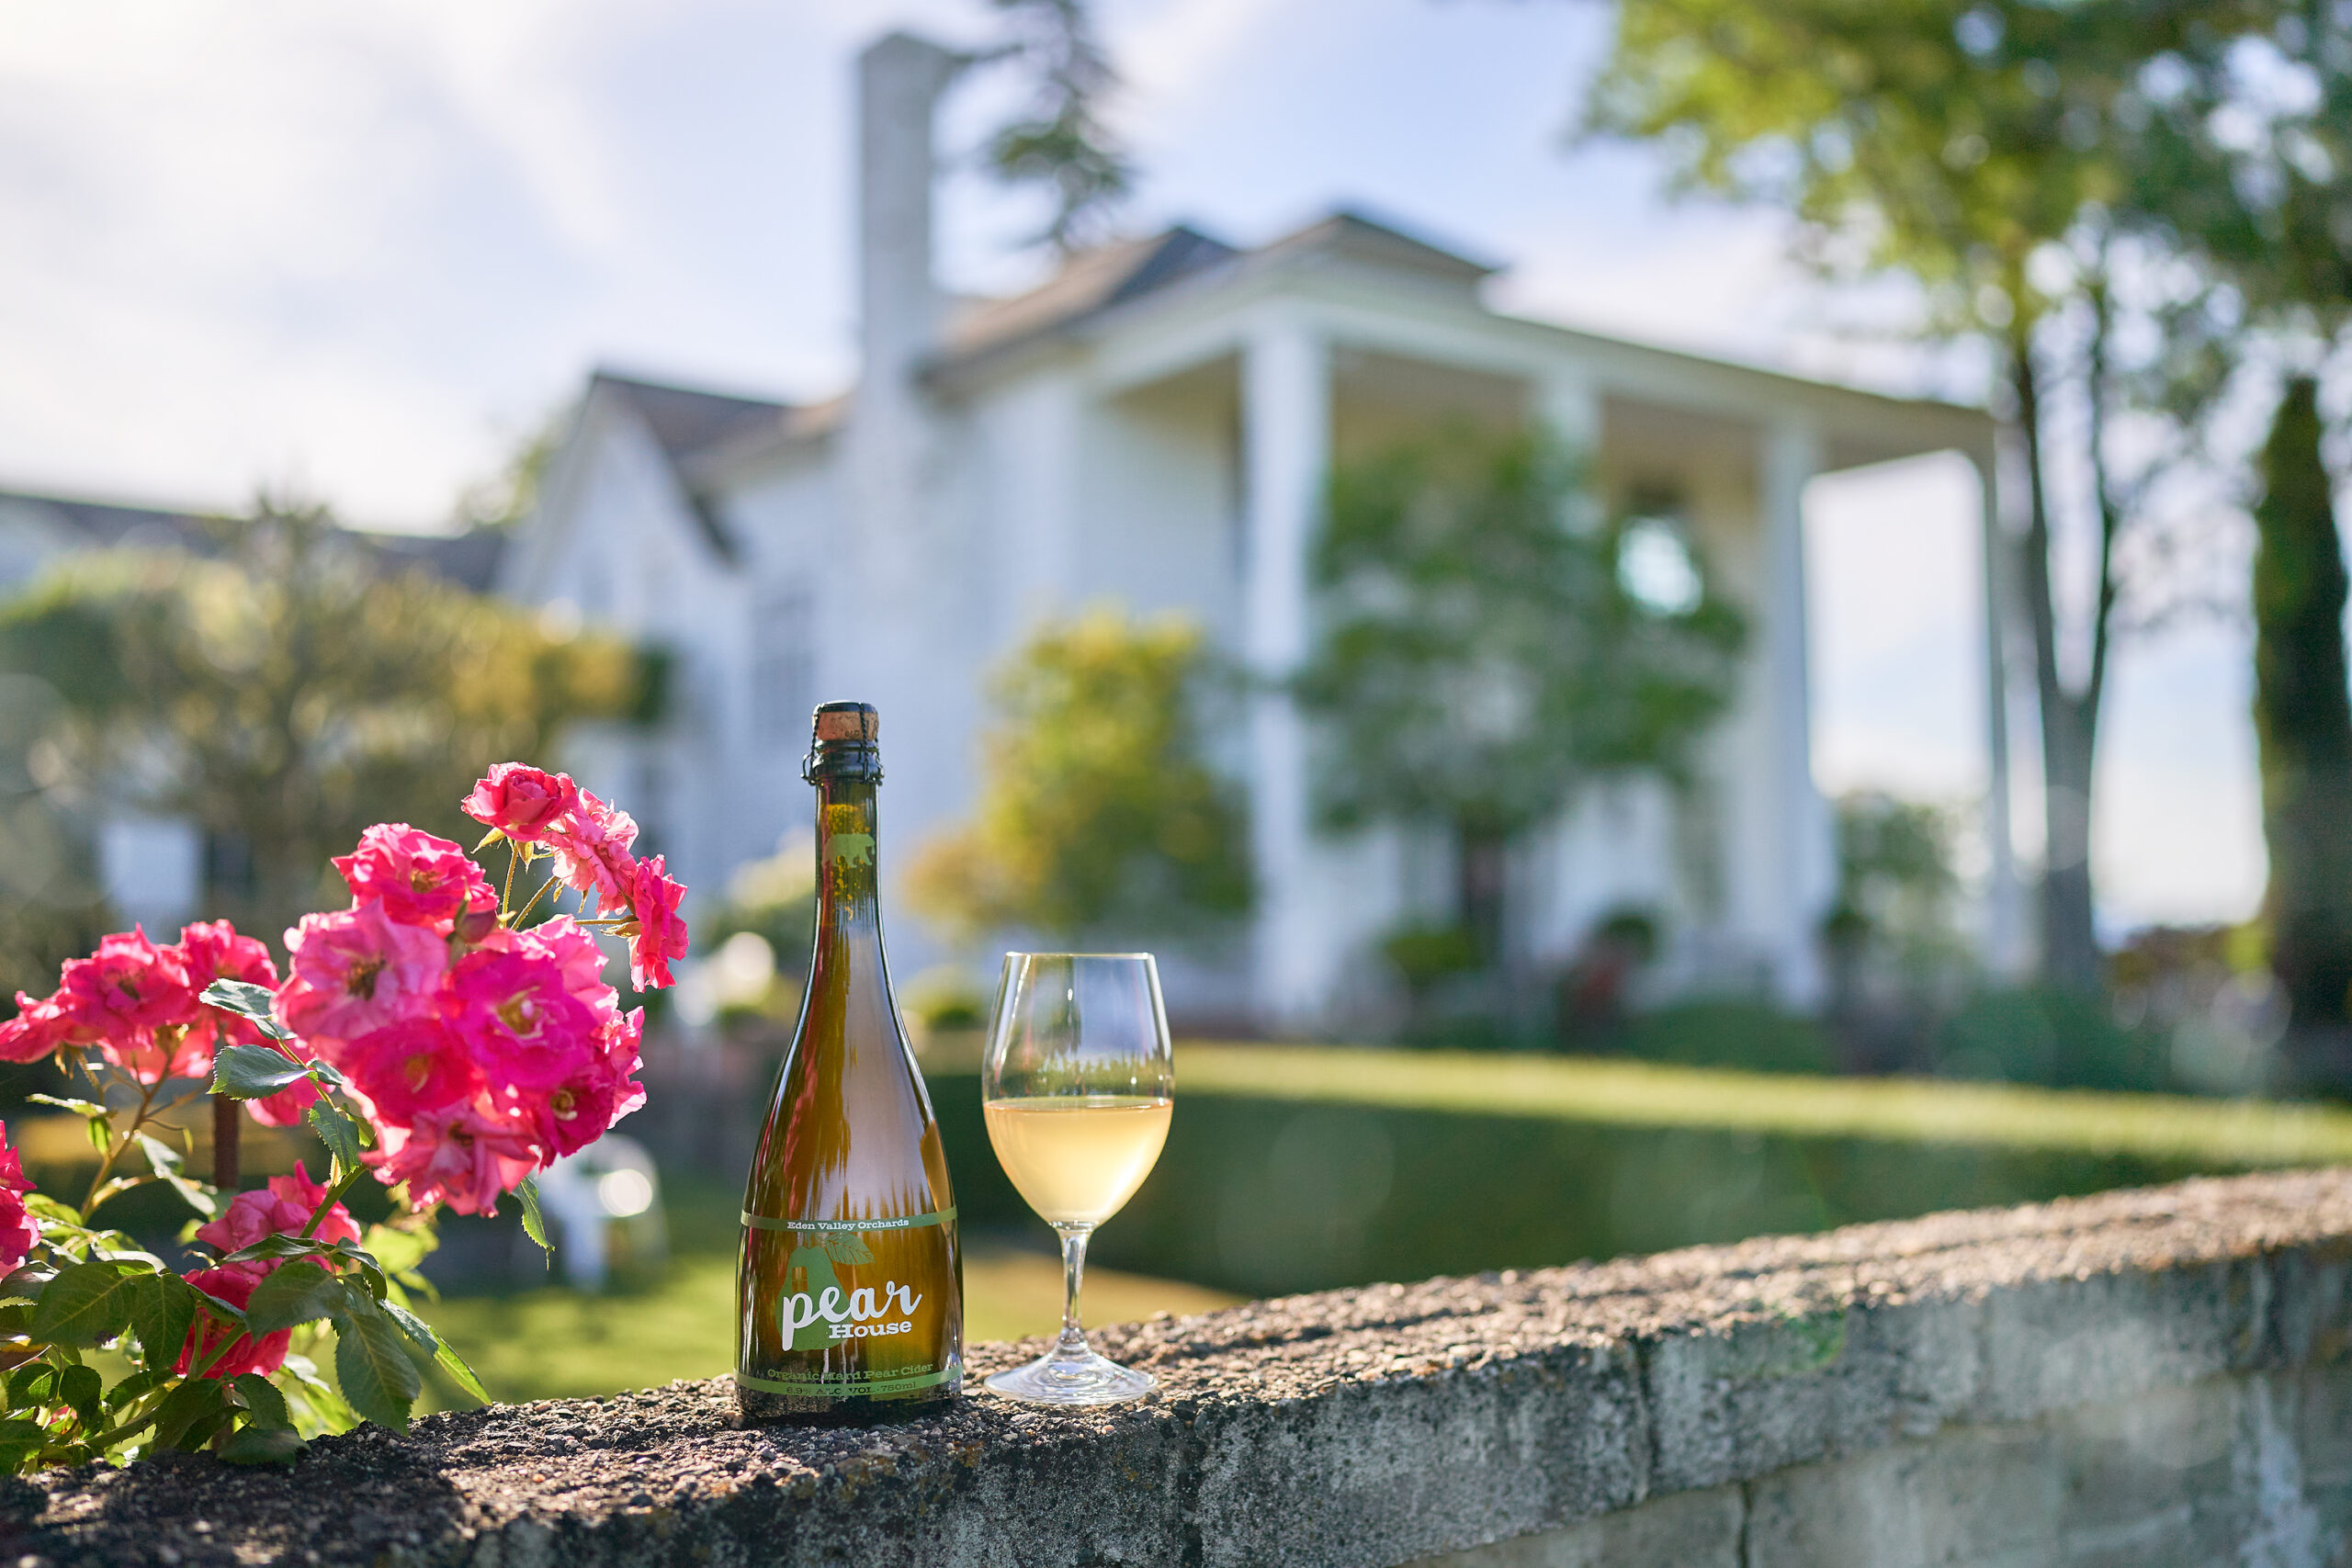 cider bottle, glass of cider and pink flowers in a vase sit on edge of wall in front of historic mansion